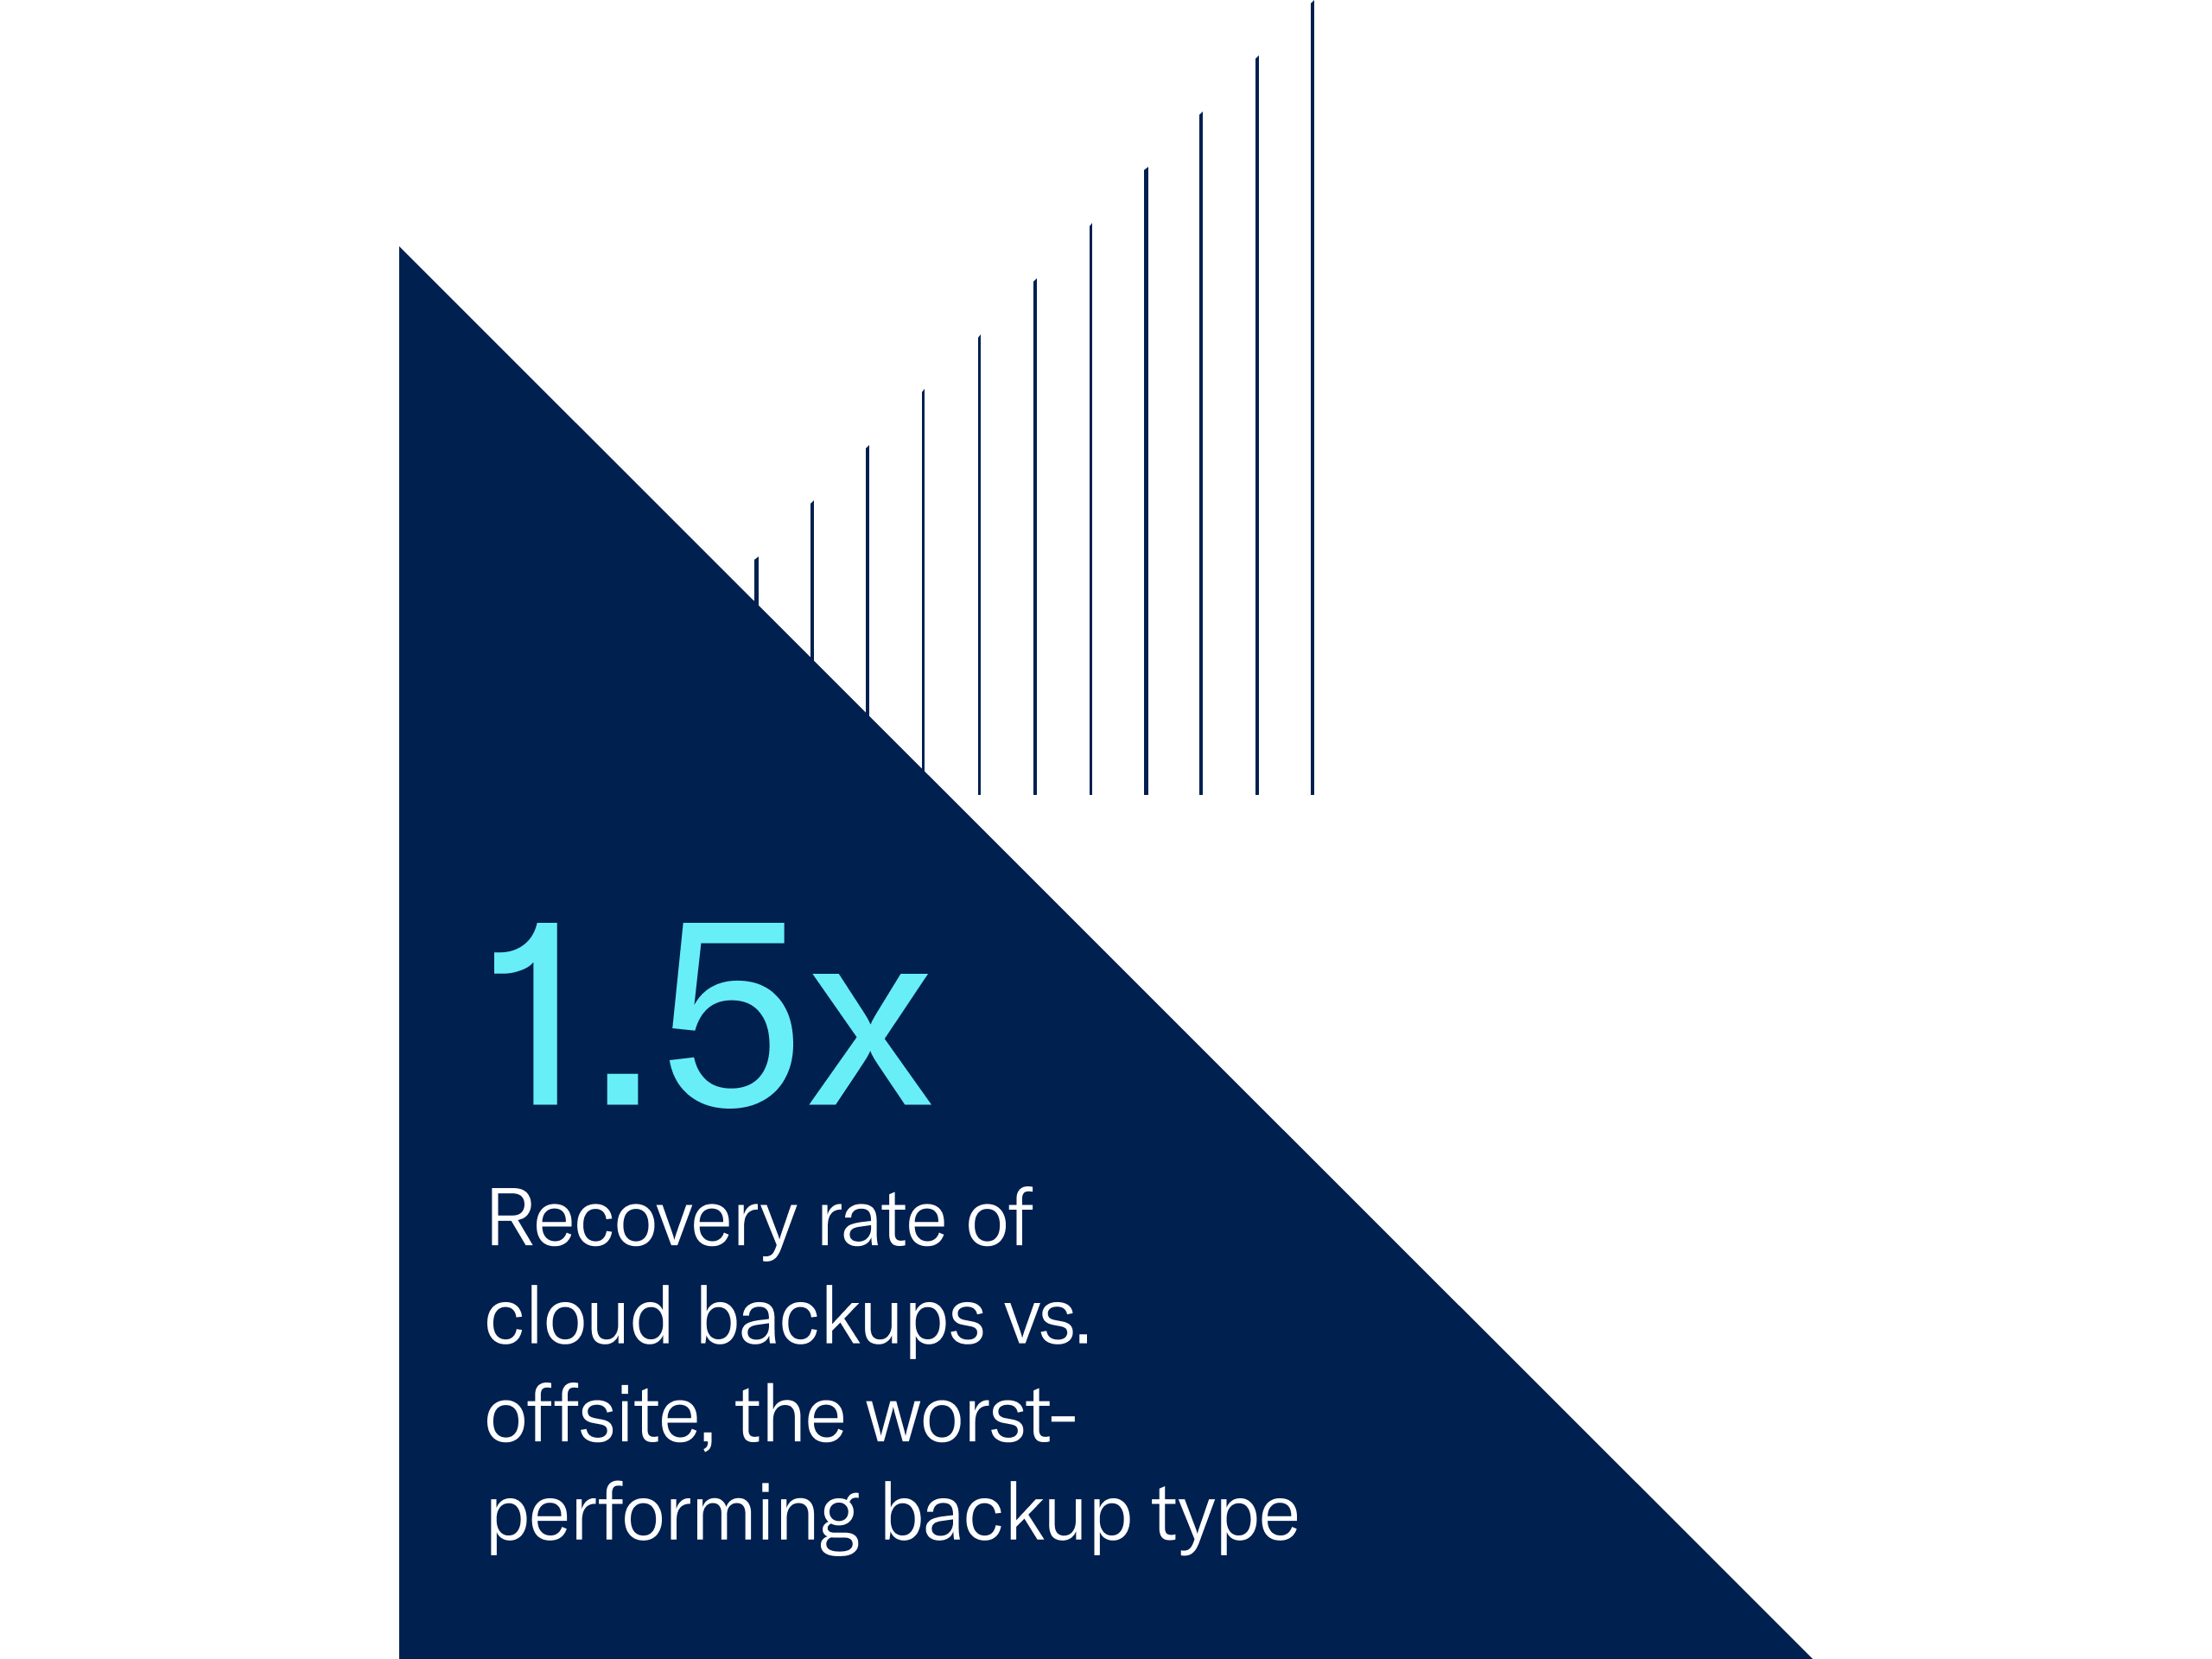 Backups Are Better in the Cloud